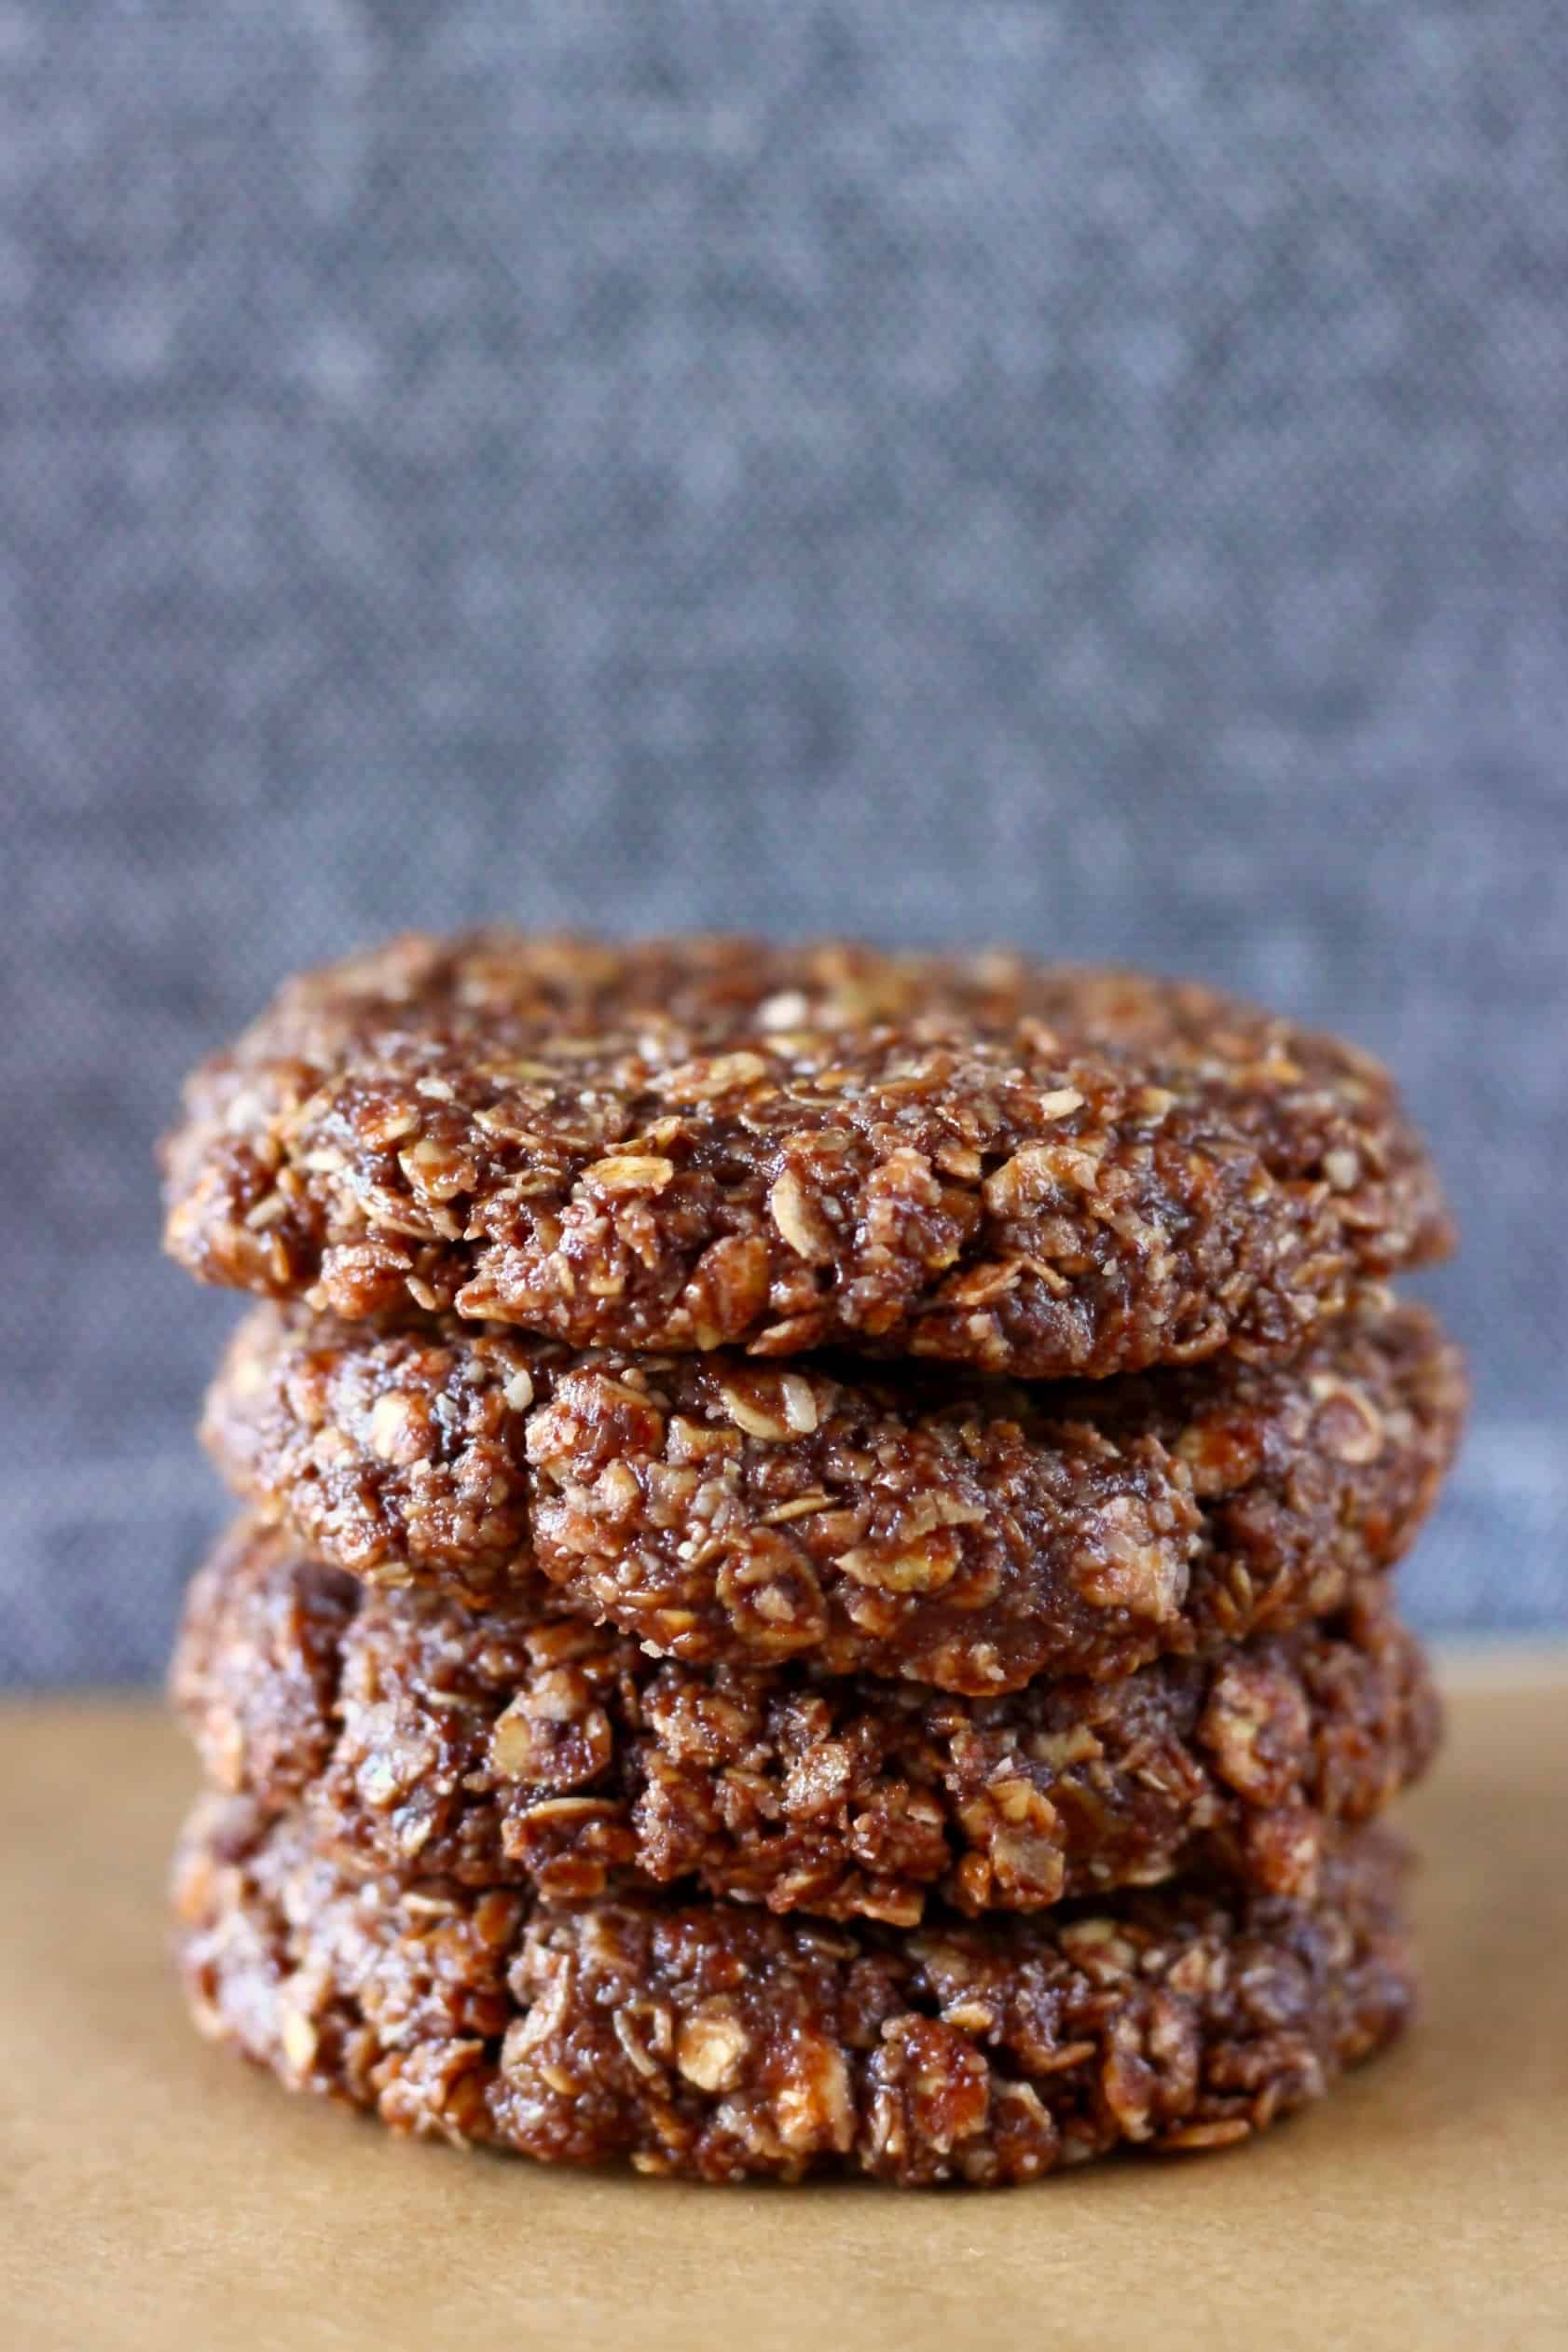 Four raw chocolate oatmeal cookies stacked on top of each other on a sheet of brown baking paper against a grey background